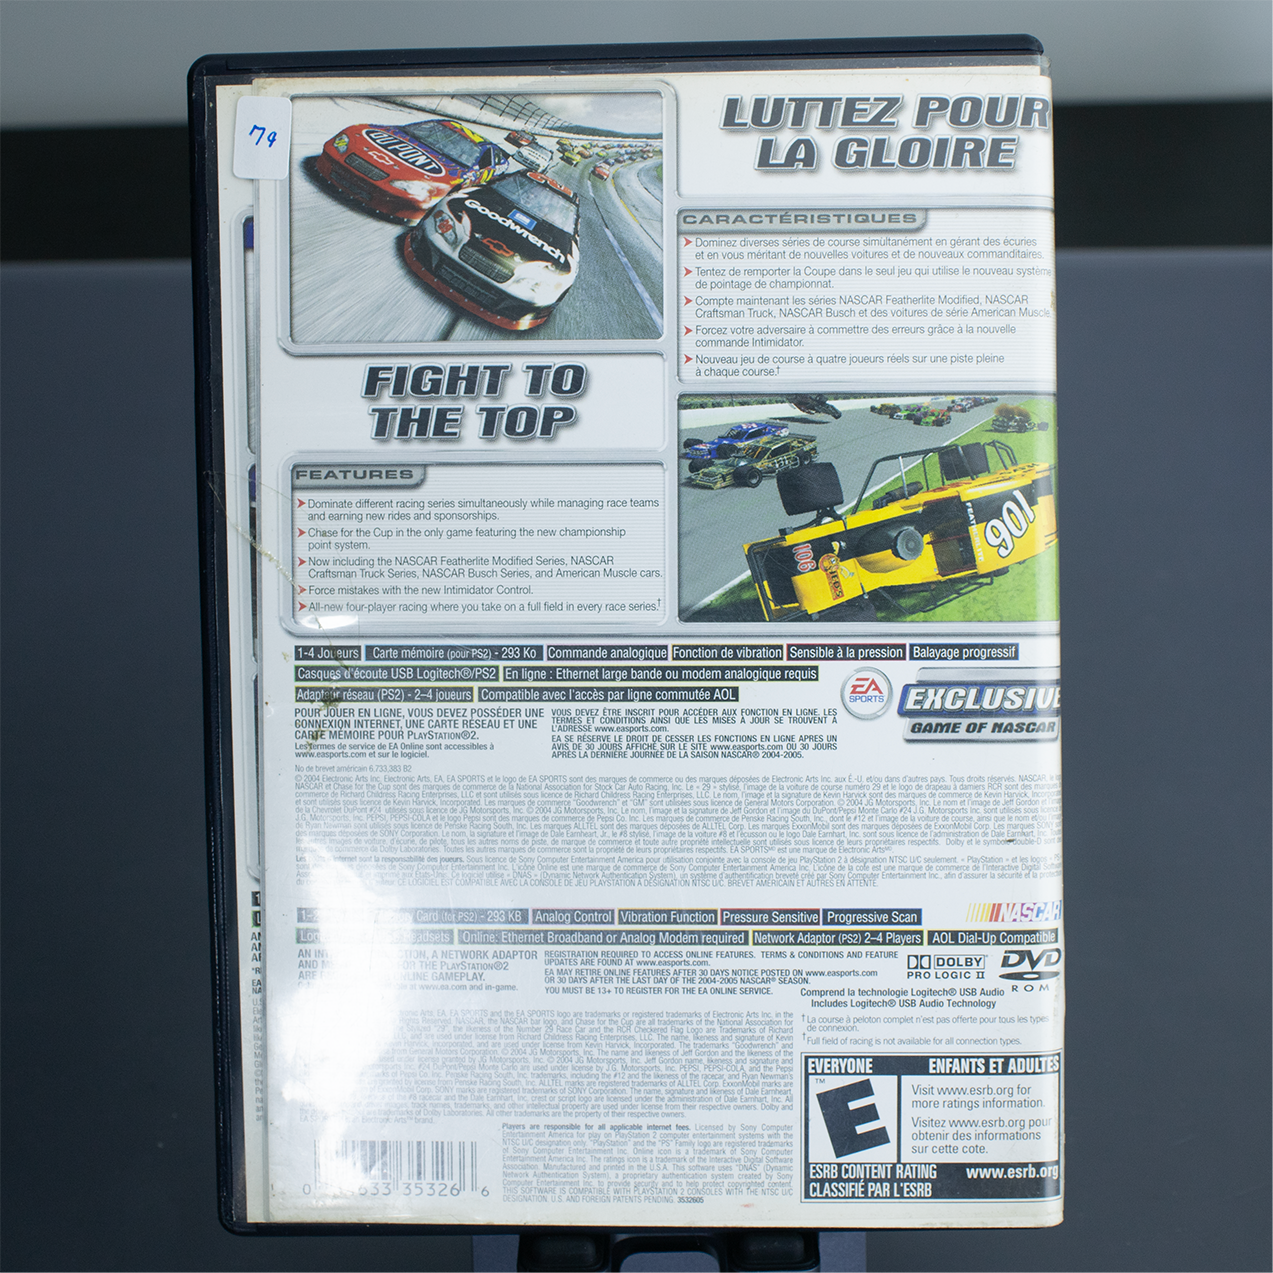 NASCAR Chase for the cup 2005 - PS2 Game